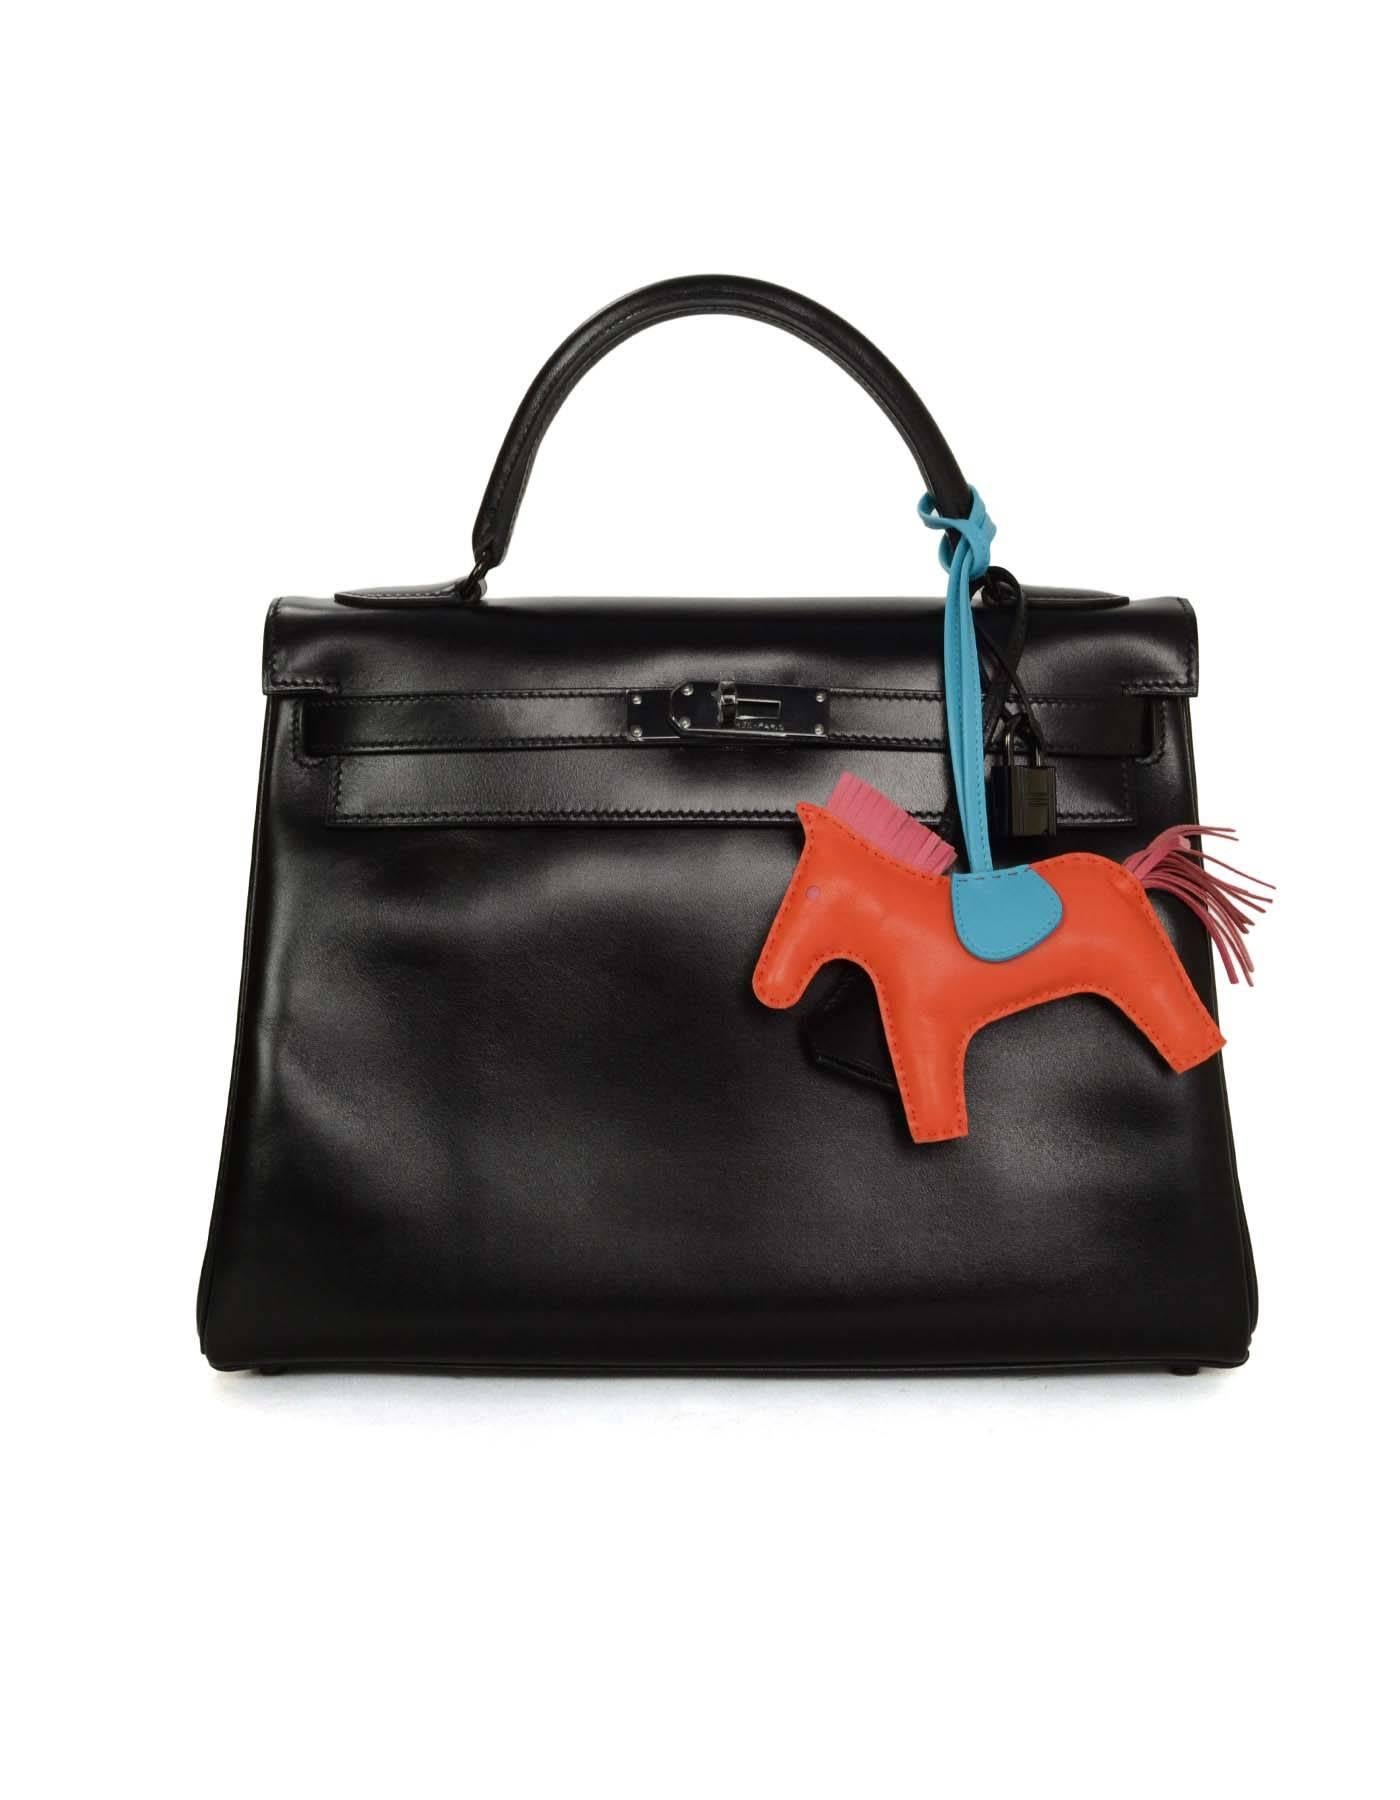 Hermes '16 Orange Poppy, Rose Azalea & Blue Izmir Rodeo Horse Charm 
Made In: France
Year of Production: 2016
Color: Orange pooppy, rose azalea and blue izmir
Materials: Leather
Closure/Opening: None
Stamp: Hermes Paris Made in France
Overall